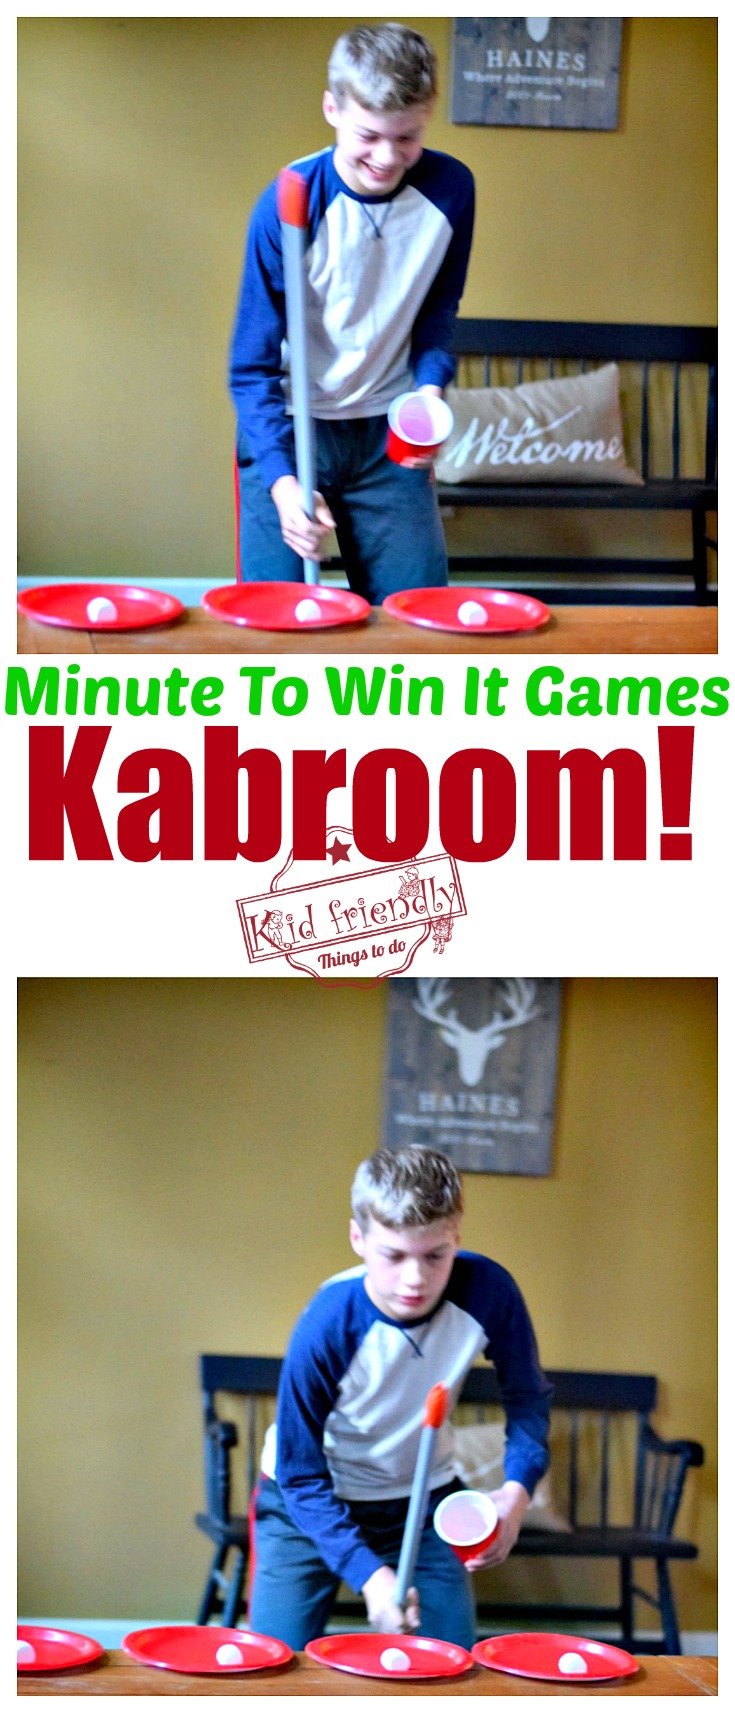 Awesome Minute To Win It Games that are Great for Kids, Teens and Adults - For Your Family Parties! - Perfect for Holiday parties, like Christmas, Thanksgiving, Halloween and even Summer Parties - www.kidfriendlythingstodo.com